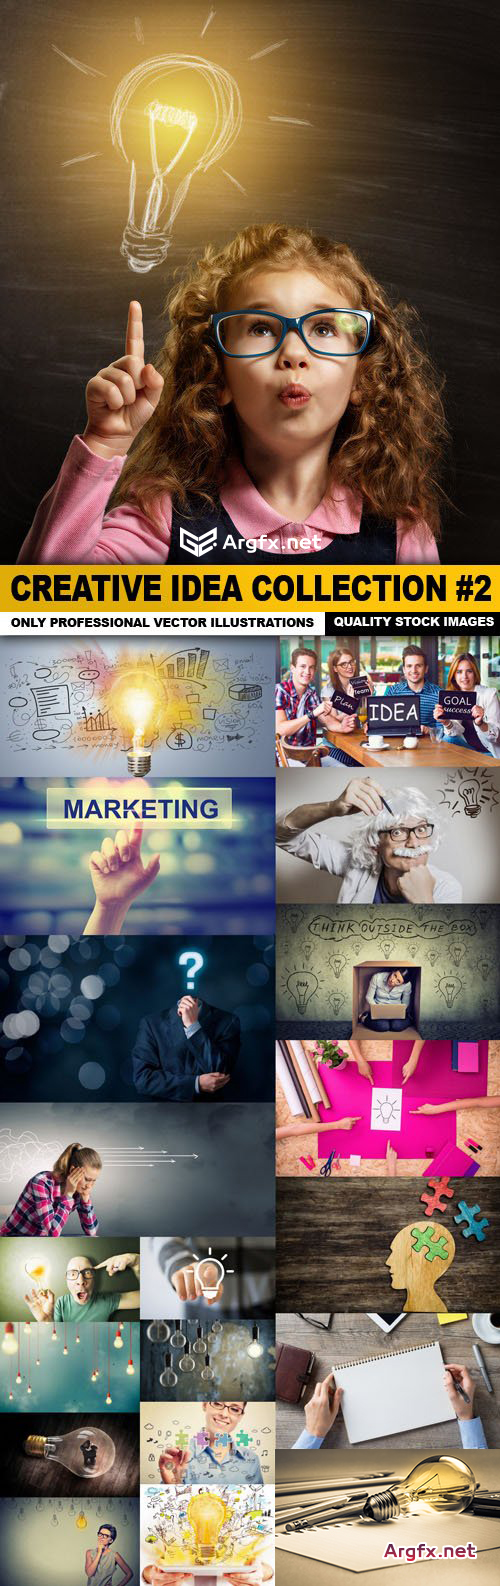 Creative Idea Collection #2 - 20 HQ Images